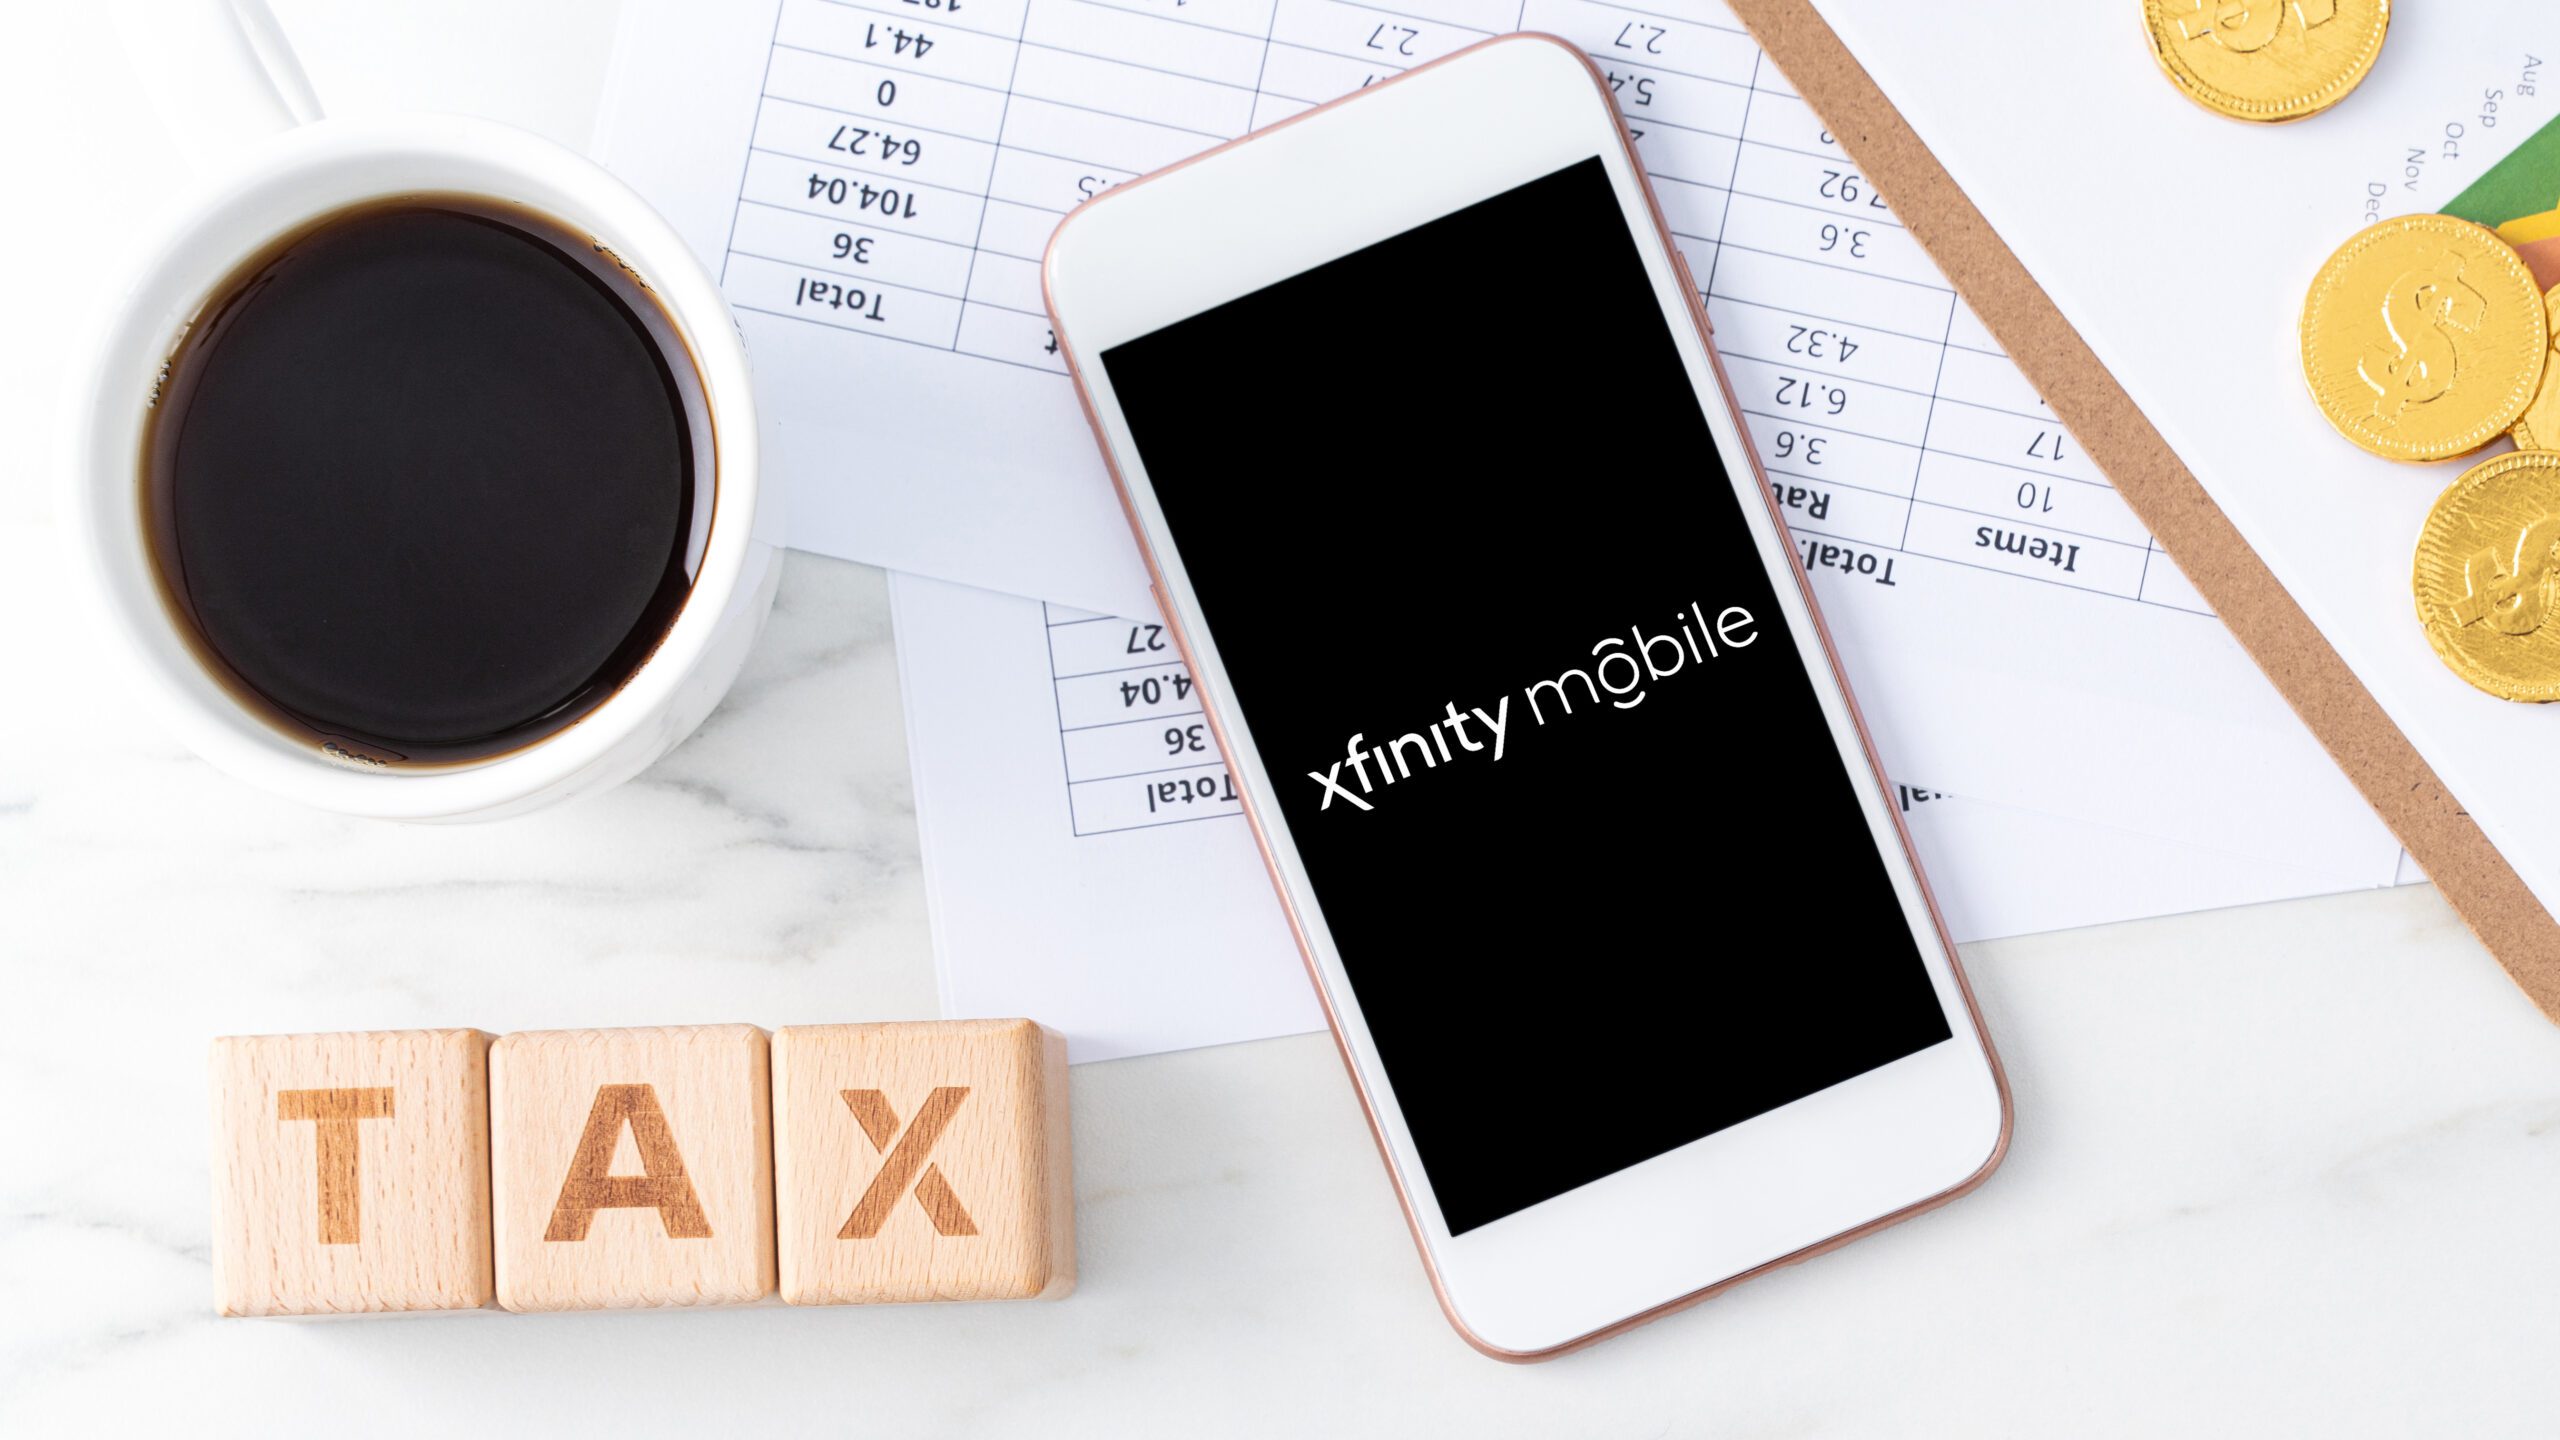 Tax Returns are Here Just in Time for New Xfinity Mobile Offers for Florida Customers